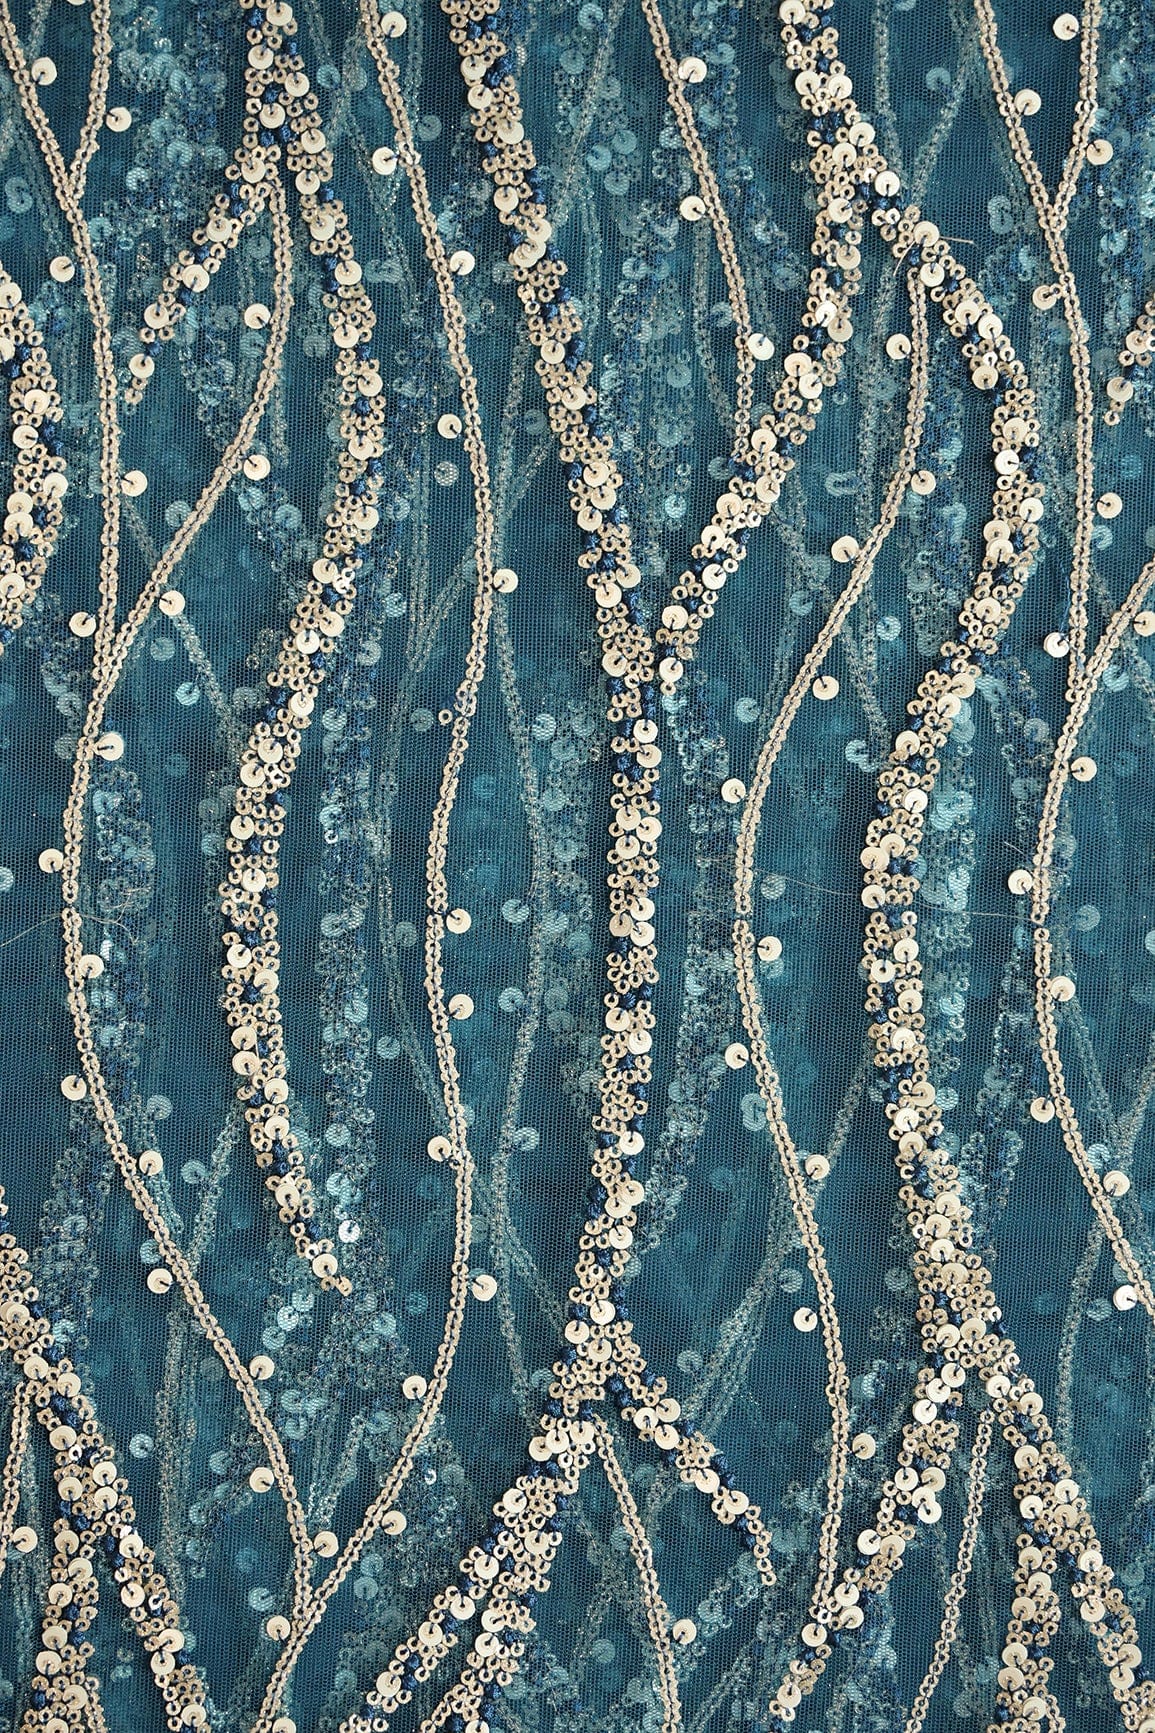 doeraa Embroidery Fabrics Gold And Silver Sequins With Blue Thread Wavy Embroidery Work On Rama Blue Soft Net Fabric